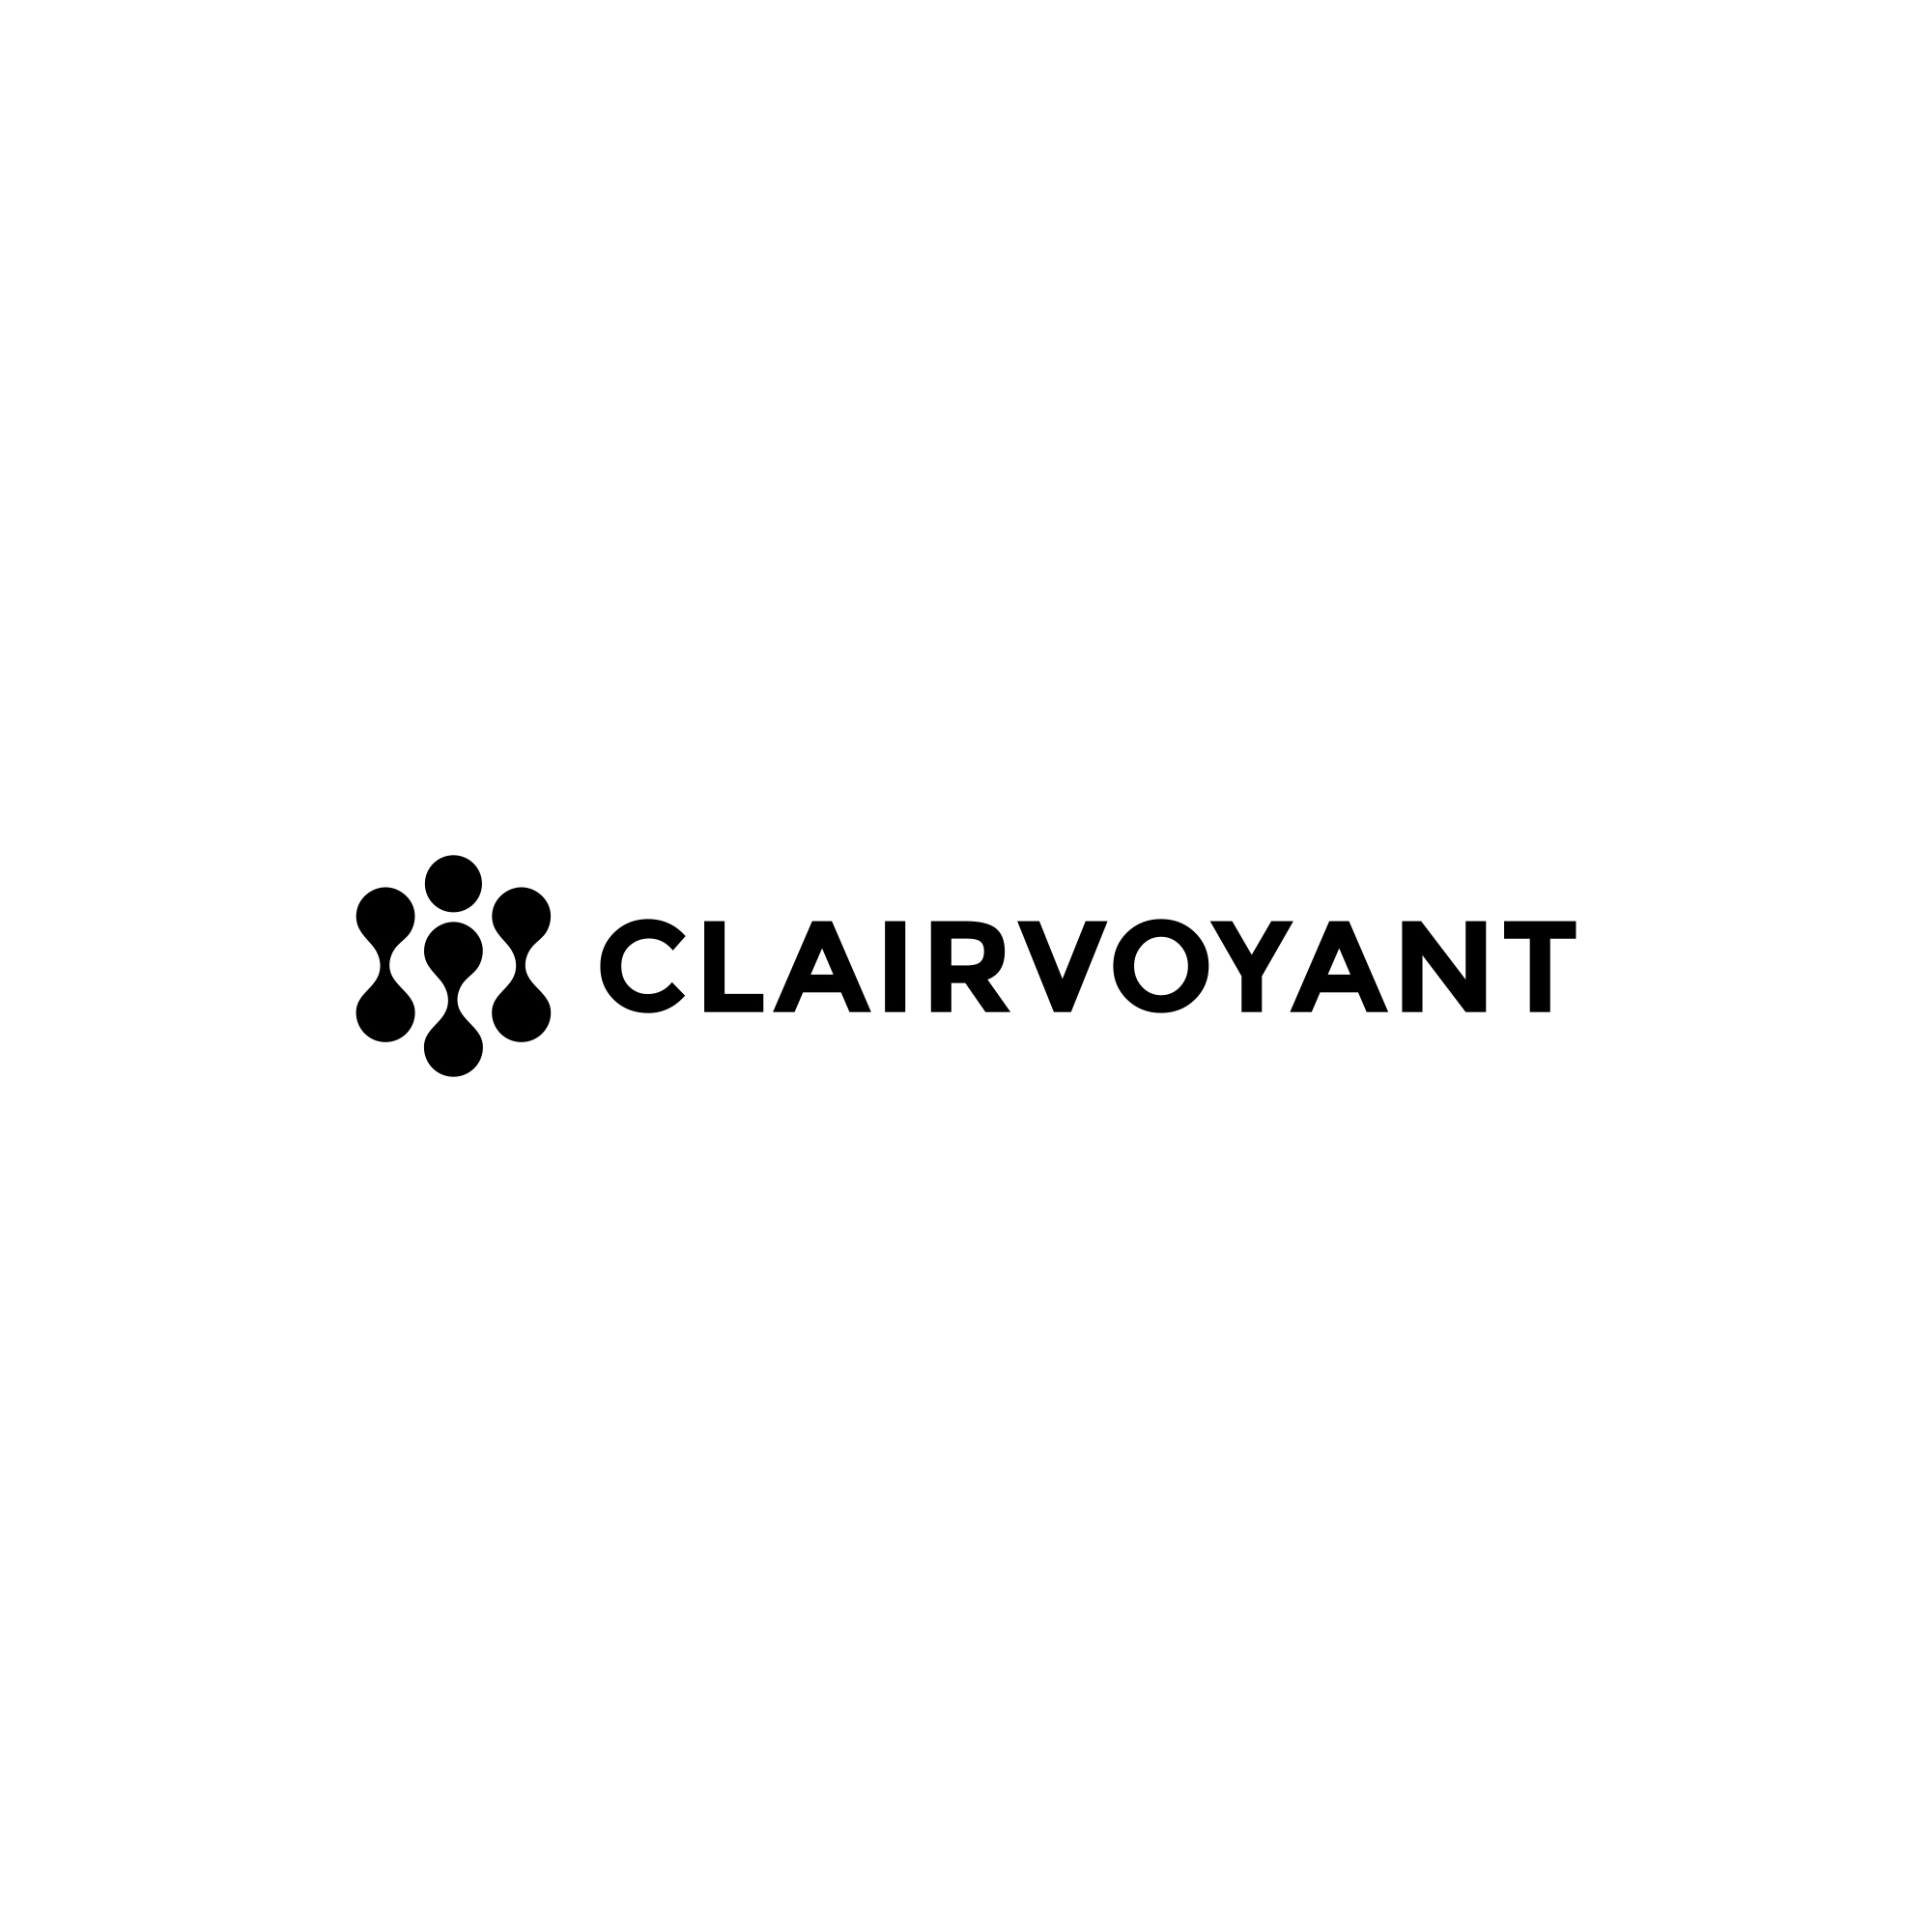 Clairvoyant Therapeutics, Thursday, October 13, 2022, Press release picture